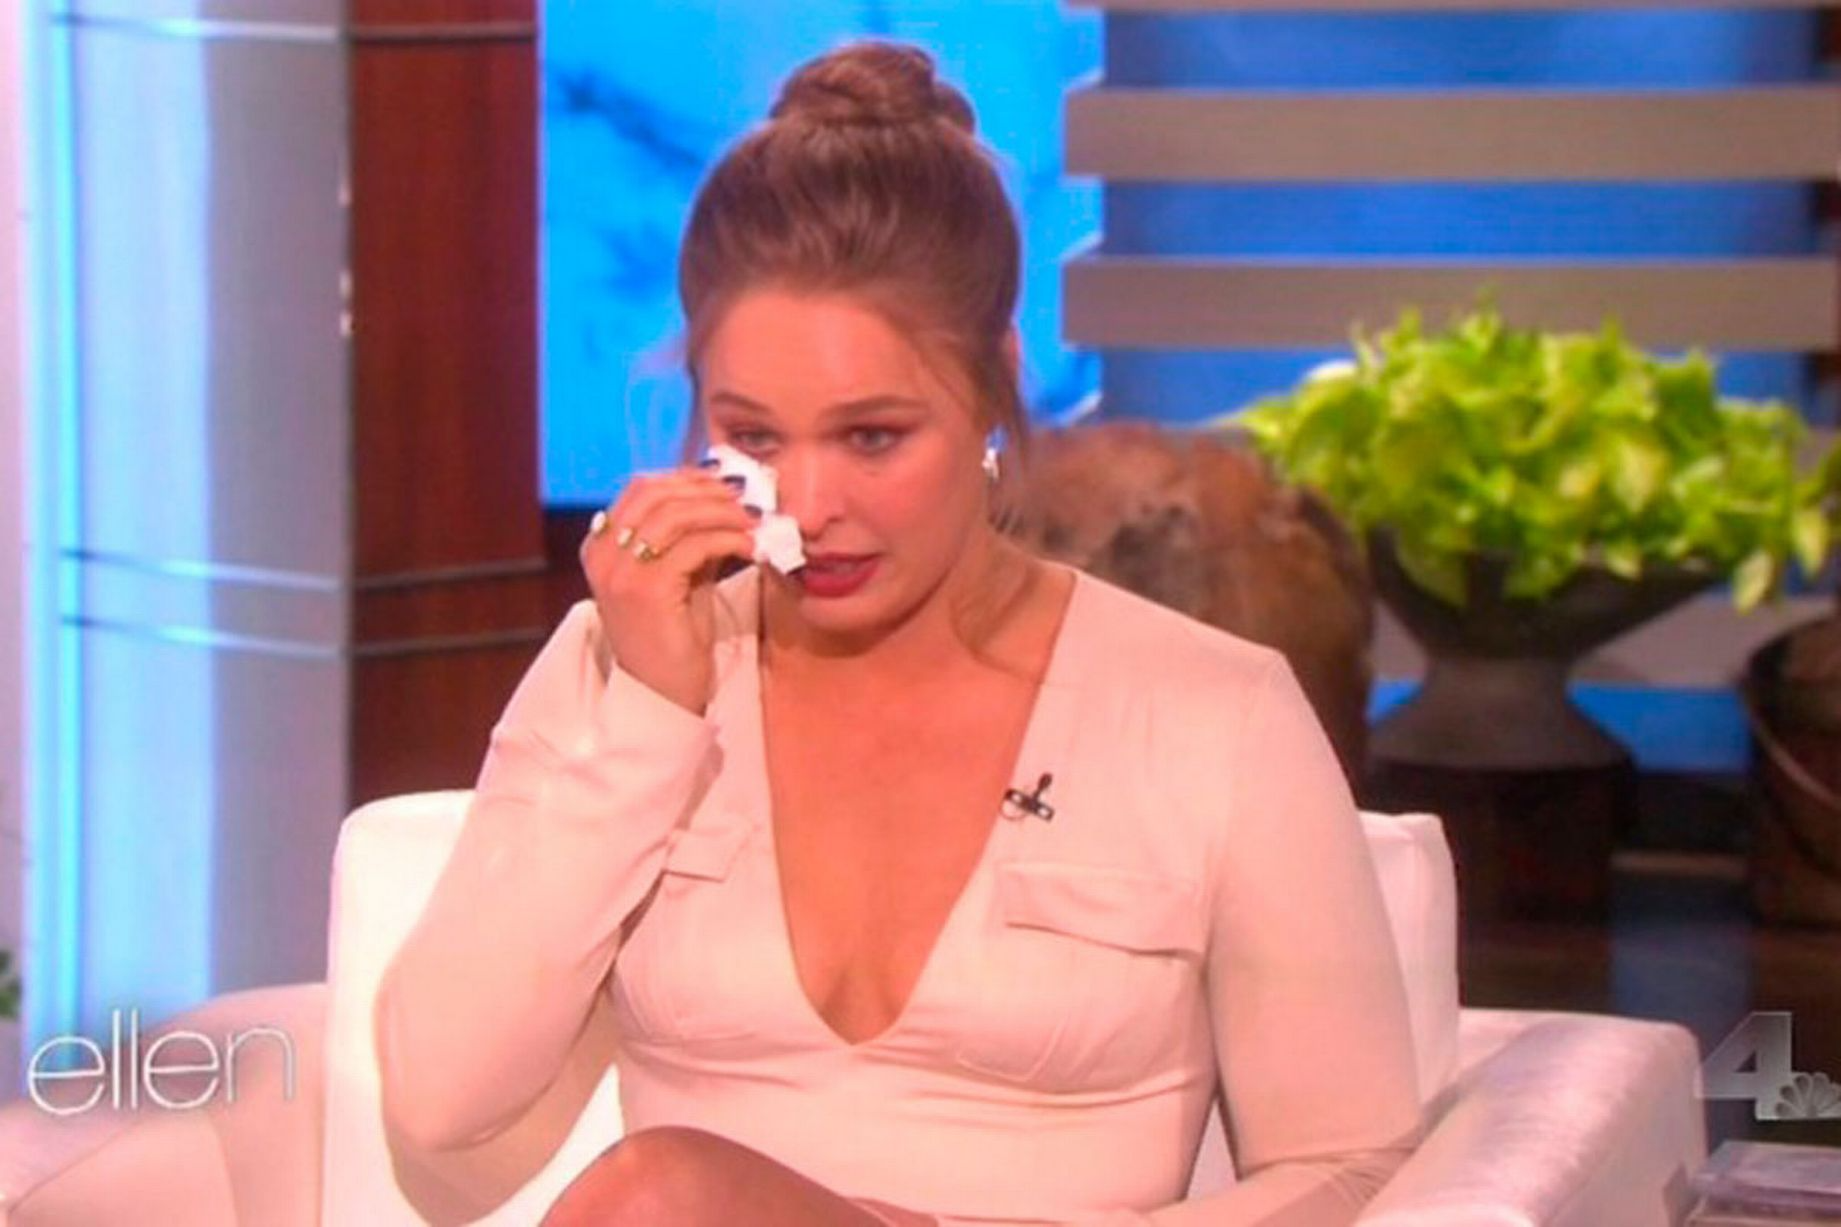 Ronda Rousey crying Blank Meme Template